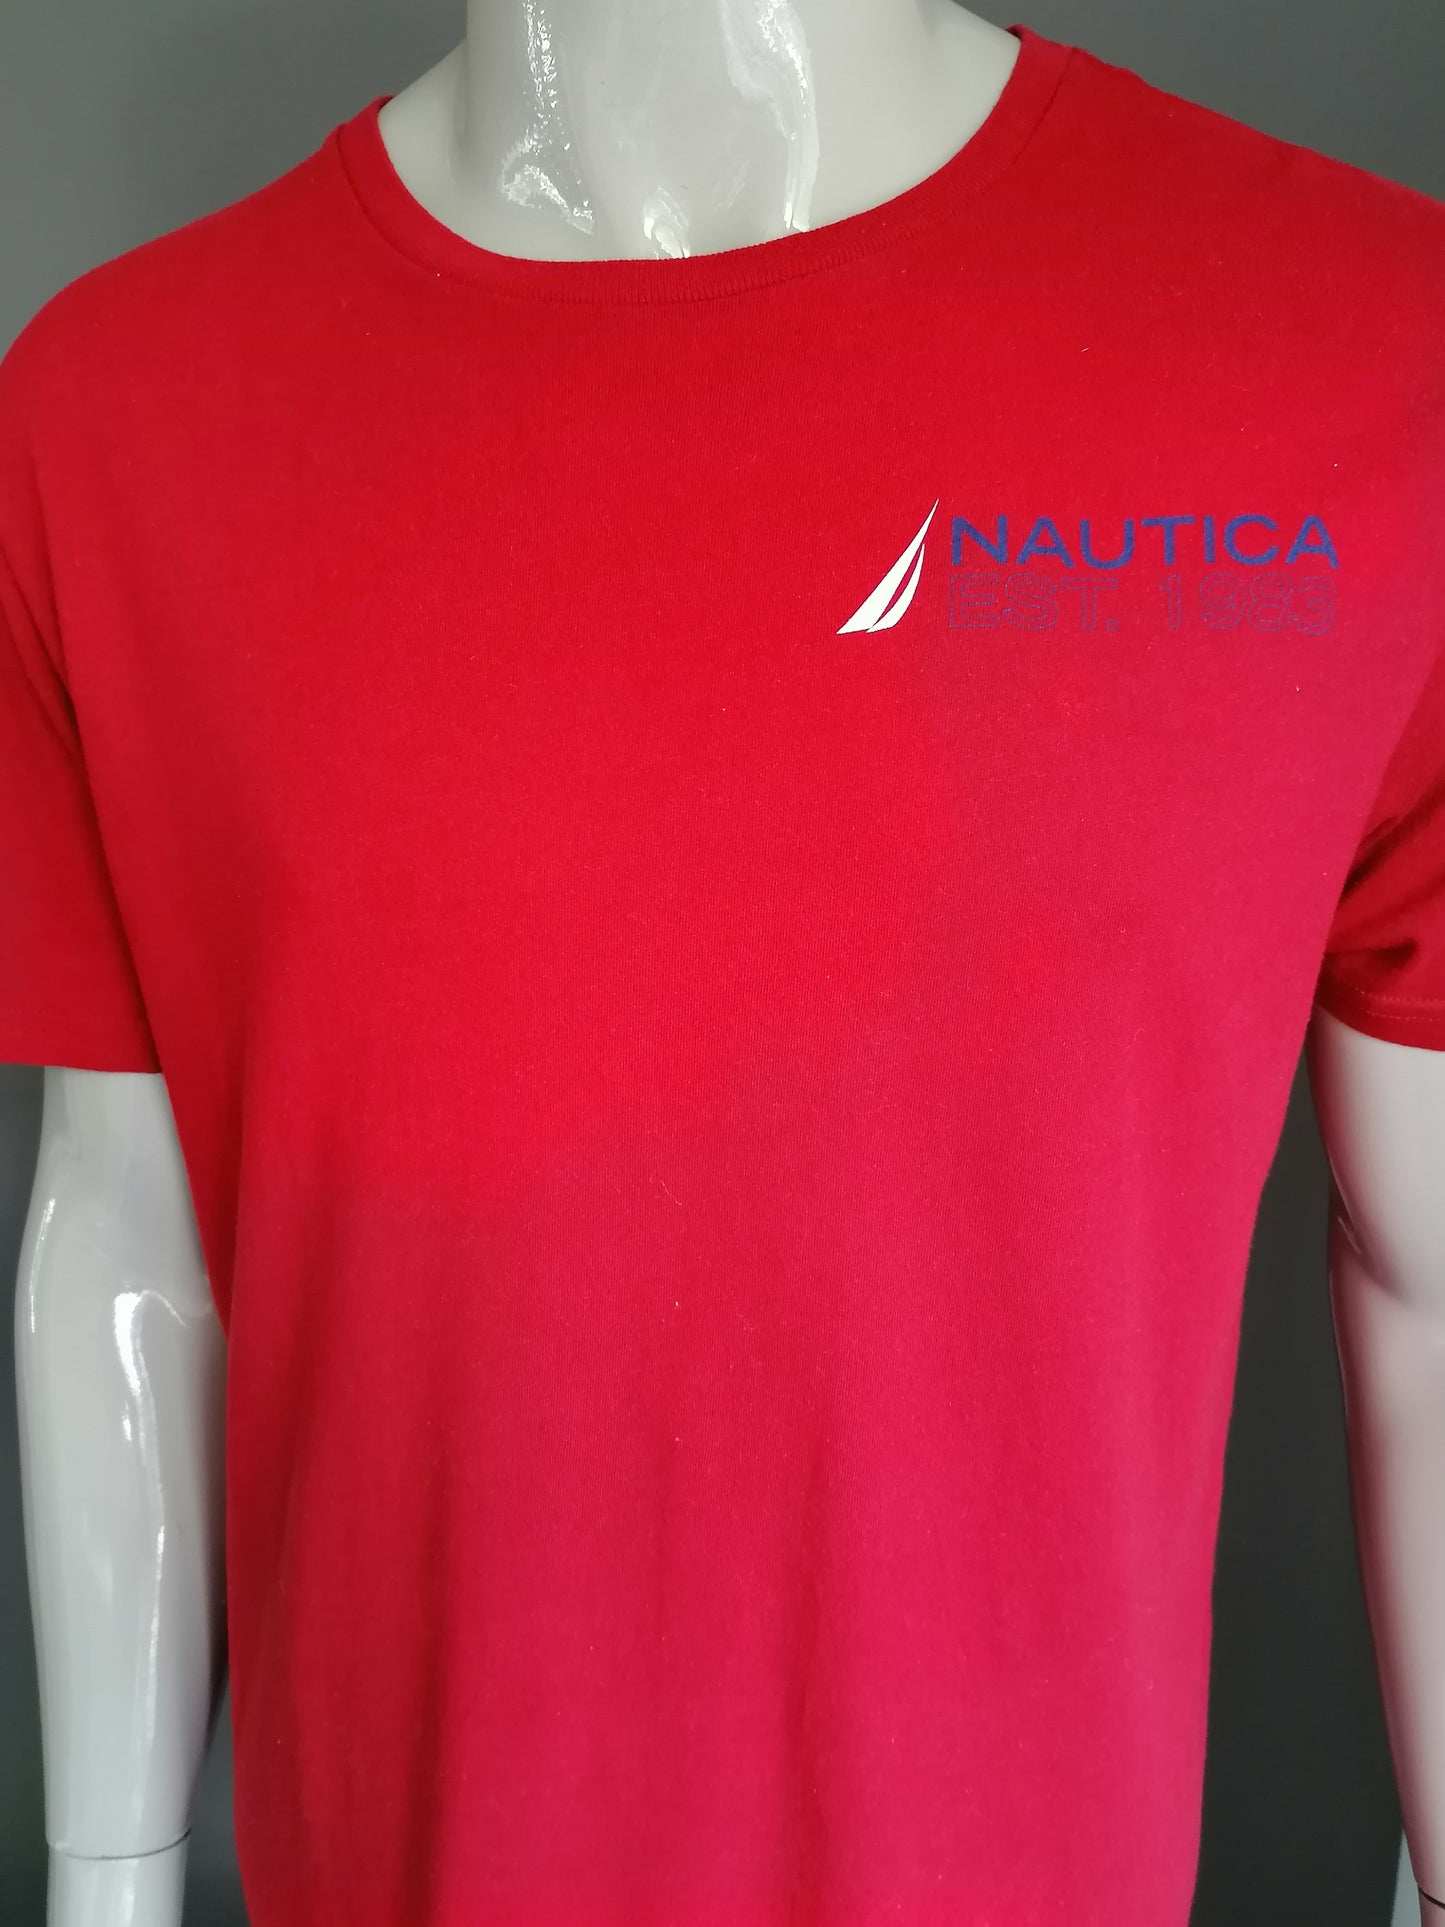 Nautica shirt. Red with print. Size L.